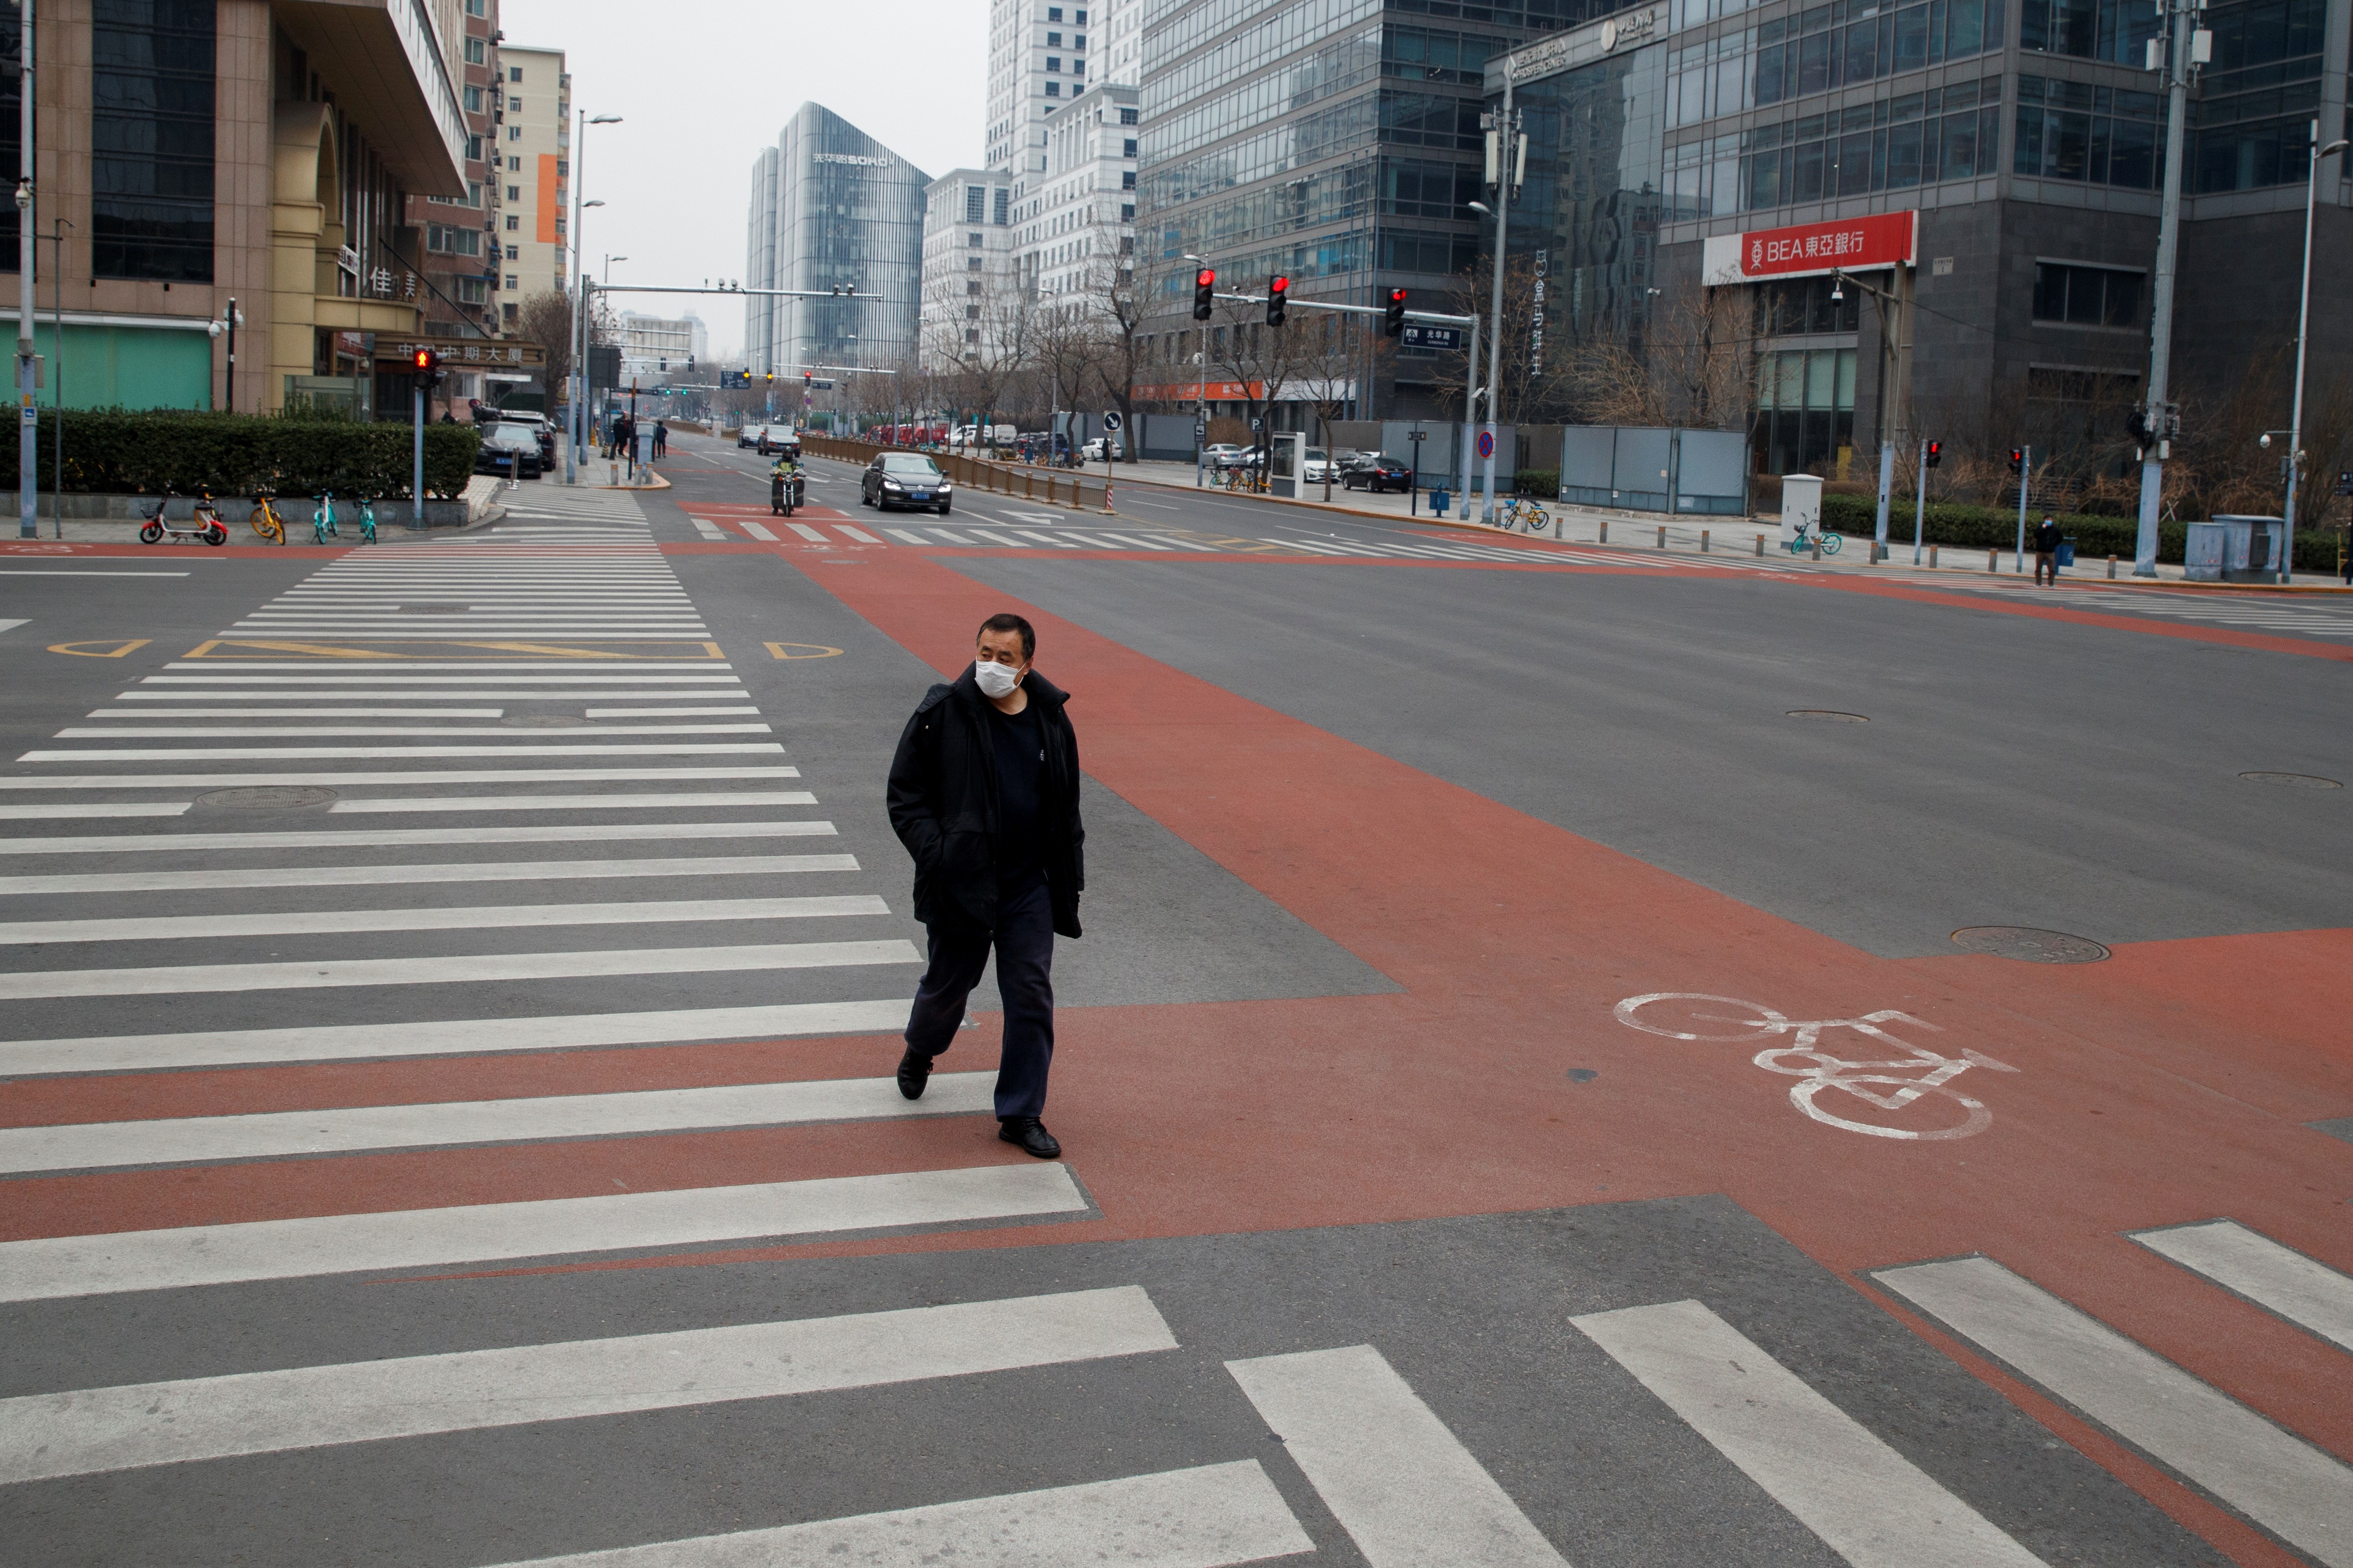 A man crosses the road in the practically deserted central business district in Beijing on February 24. Photo: Reuters